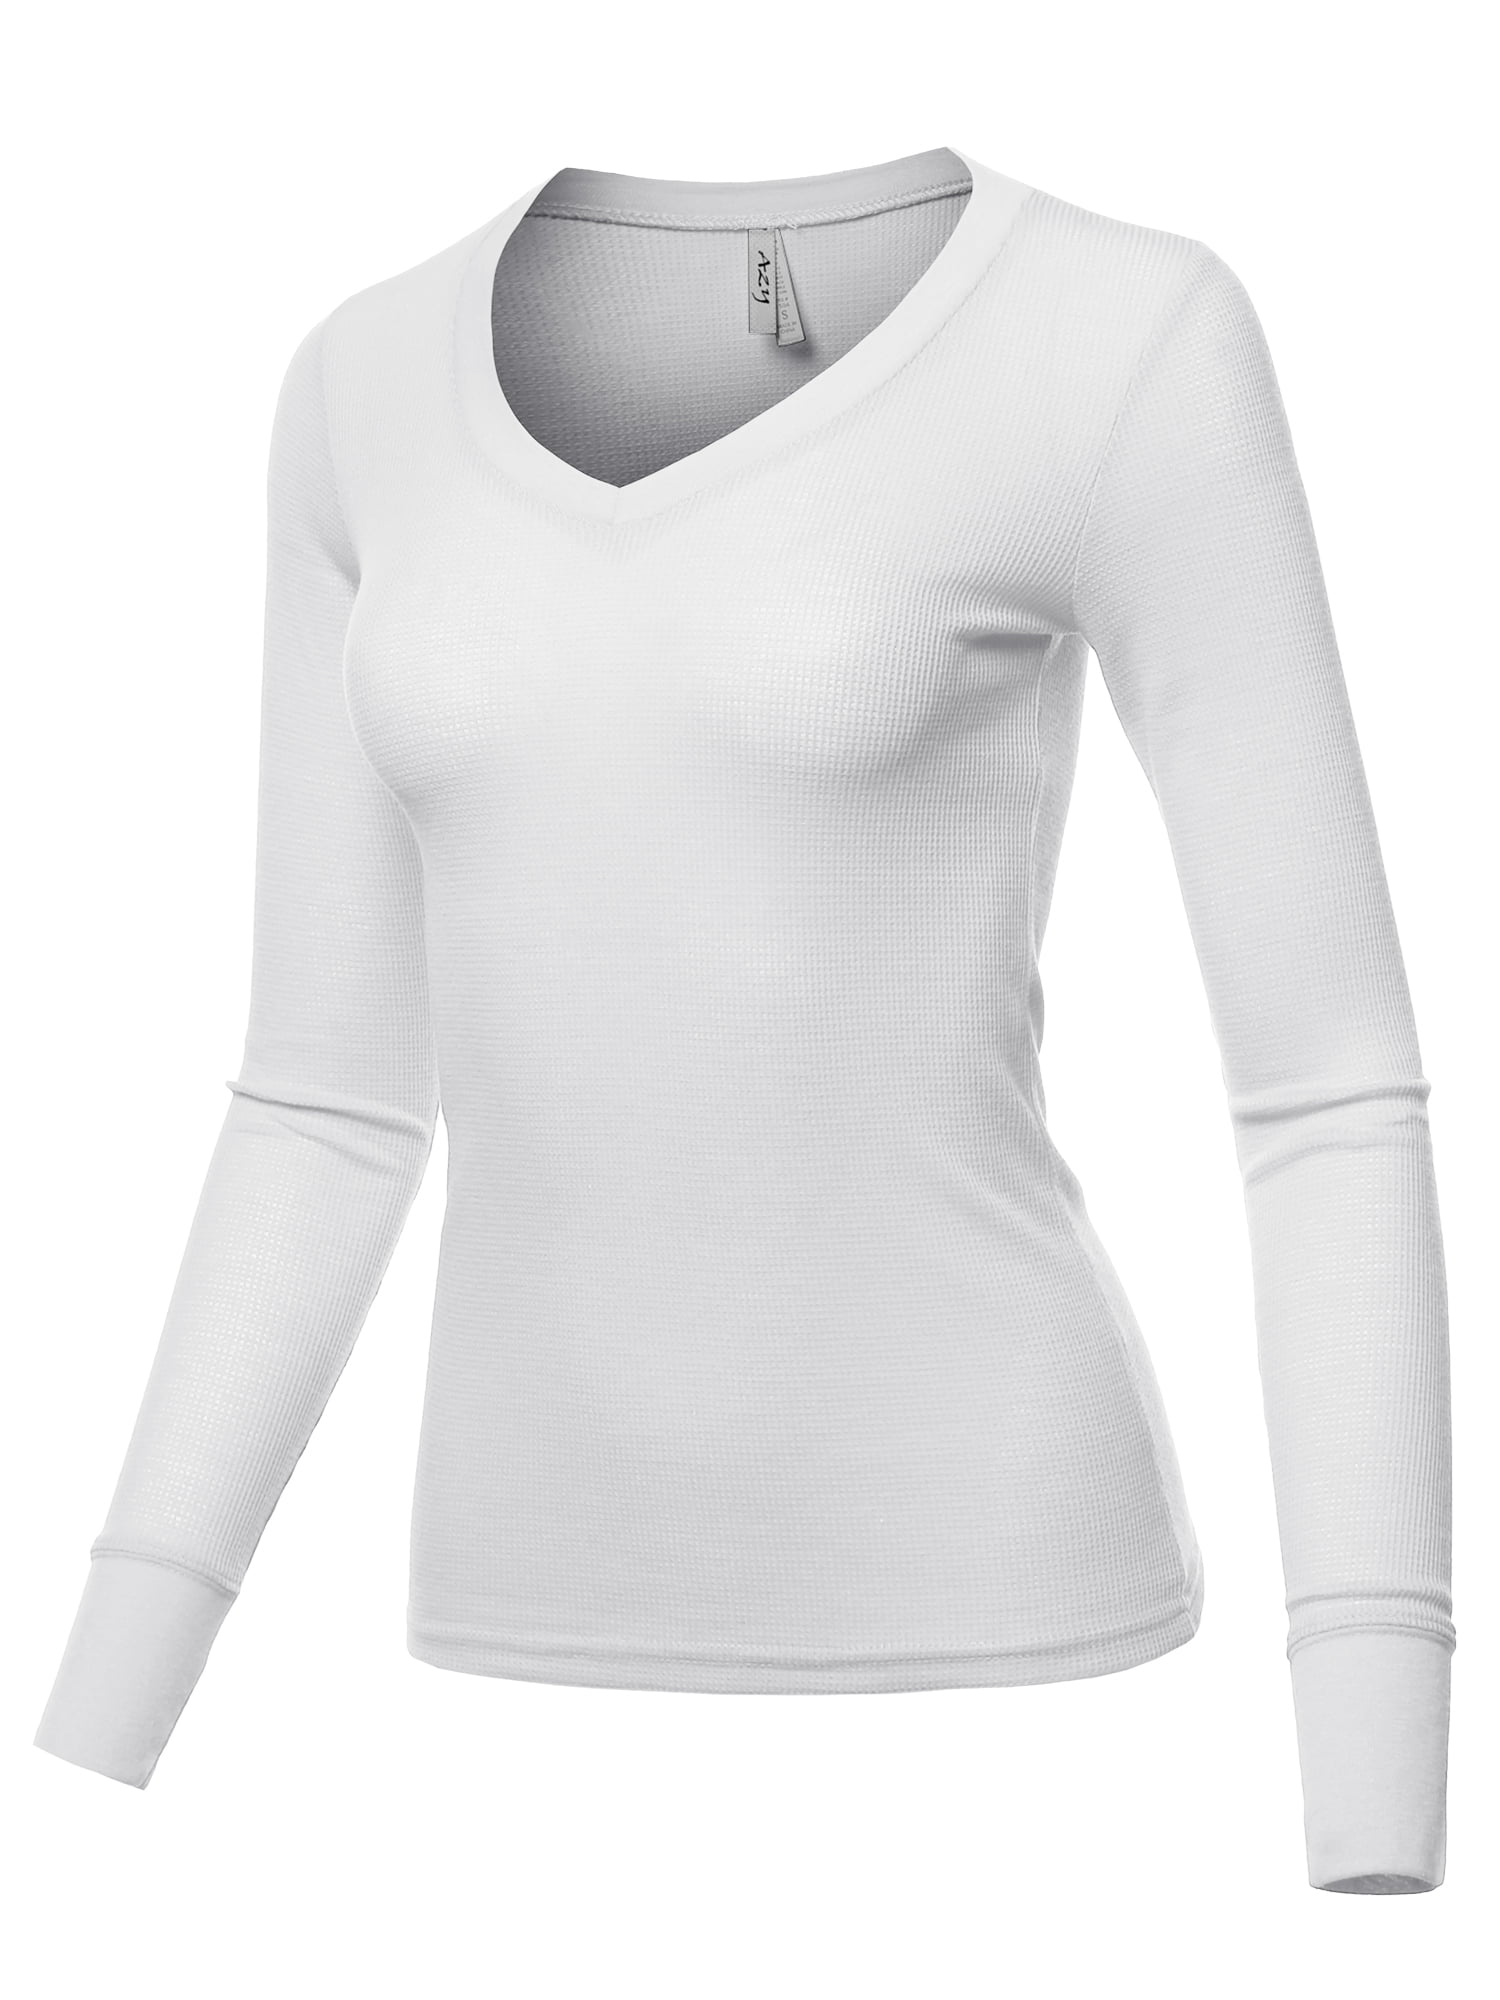 A2y Womens Basic Solid Long Sleeve V Neck Fitted Thermal Top Shirt White L 